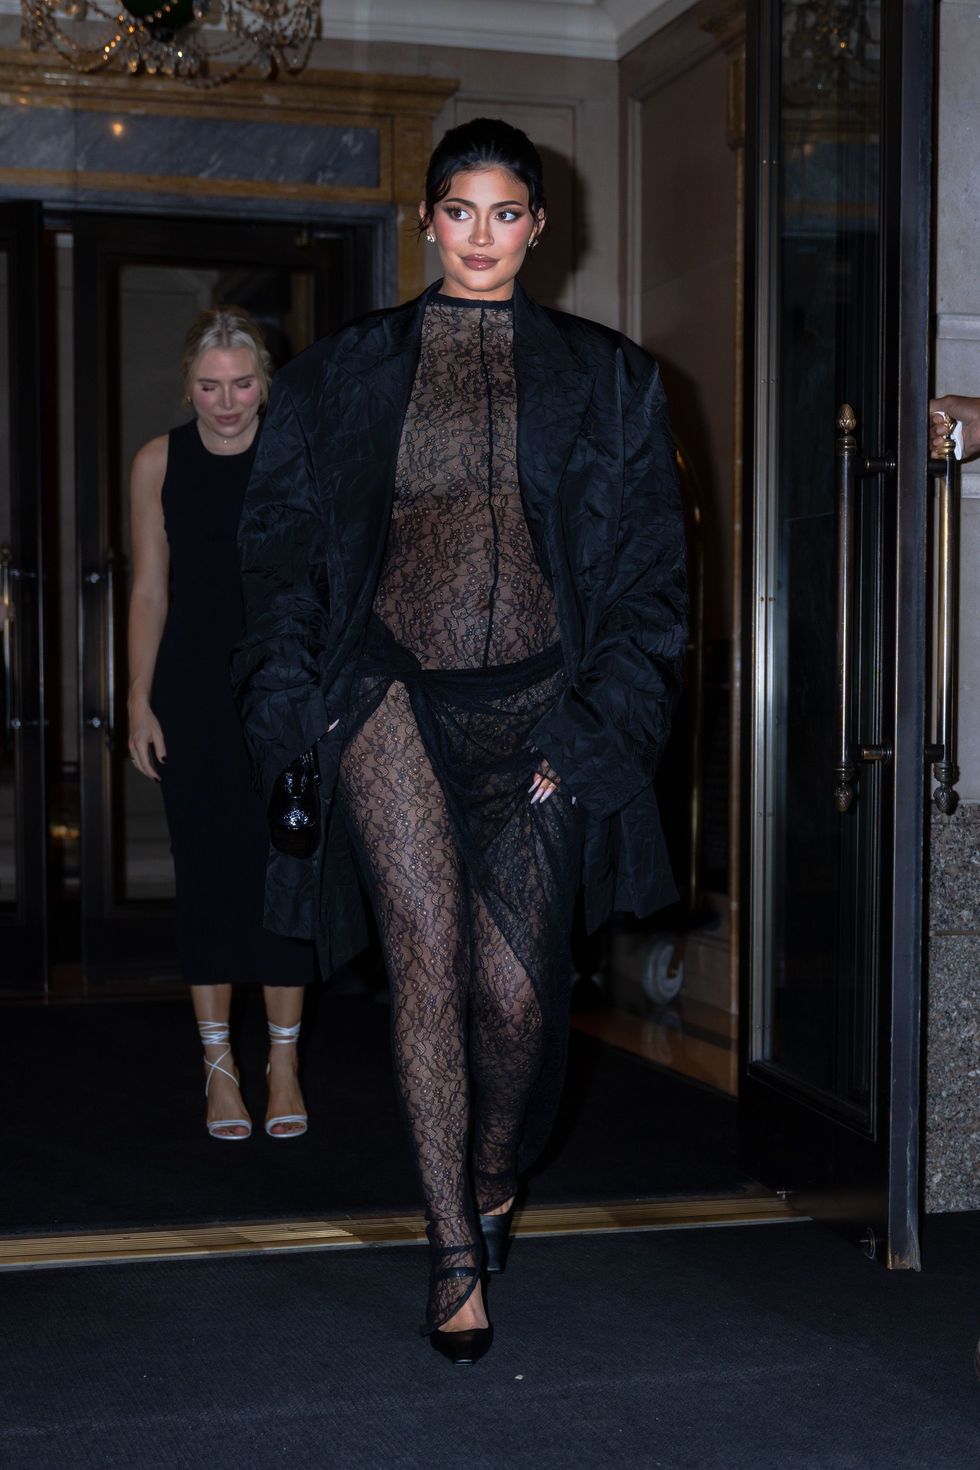 Kylie Jenner Shows Her Underwear in a Sheer Black Lace Dress